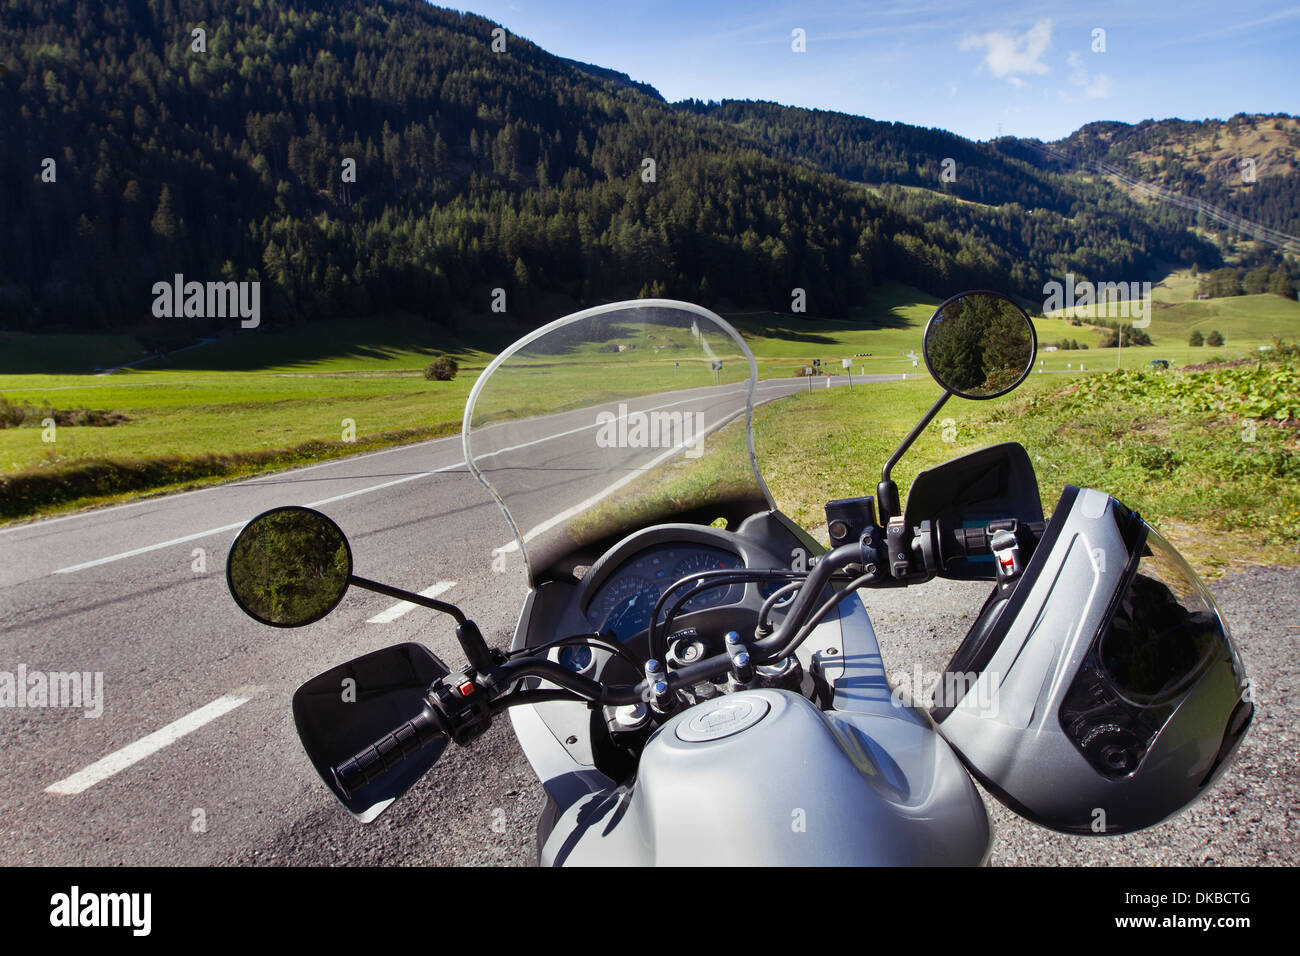 motorcycle trip in mountains Stock Photo